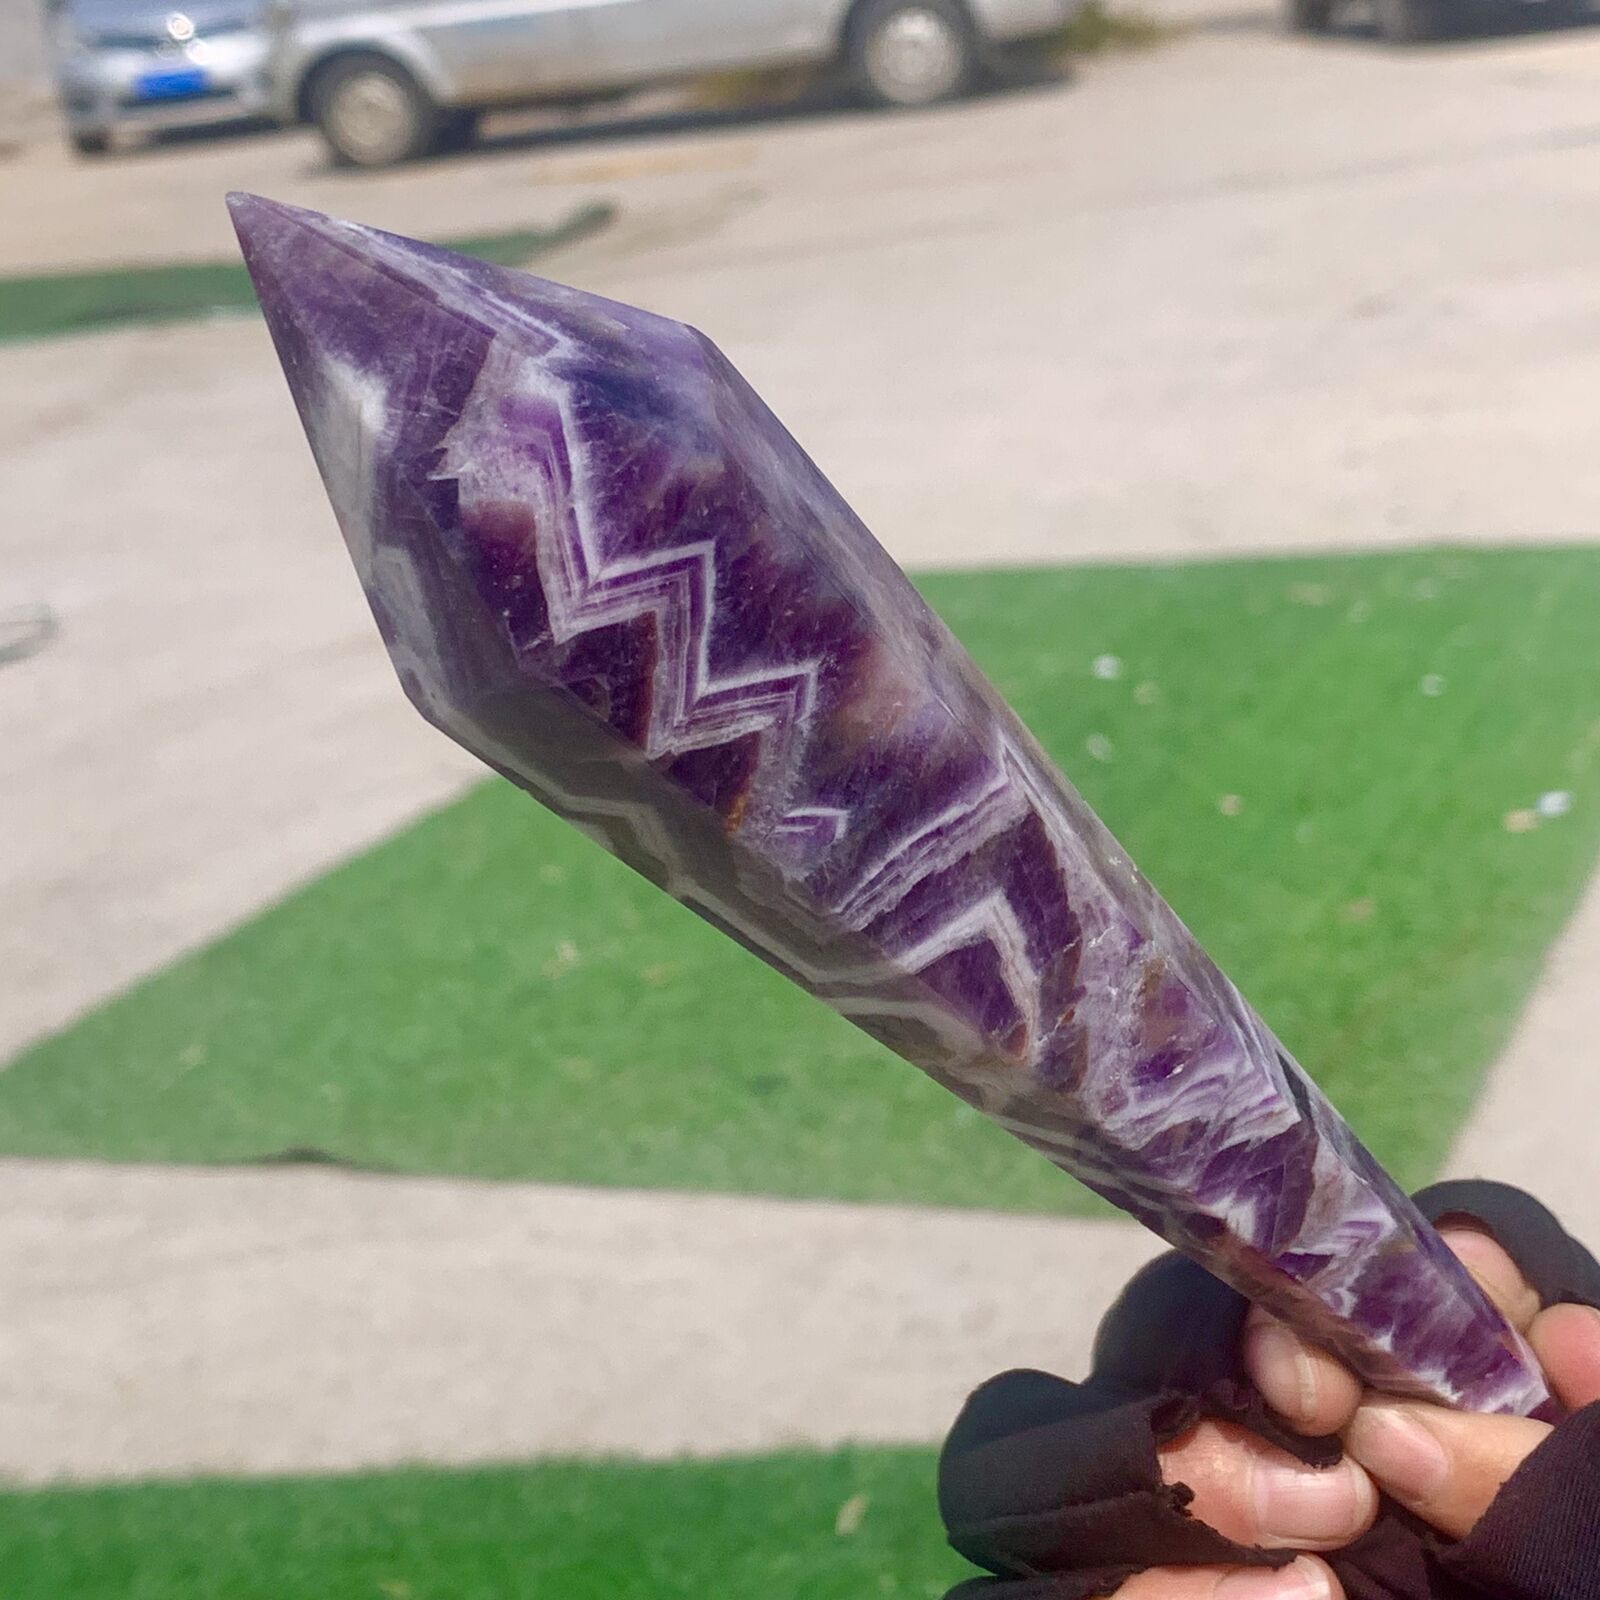 252gNatural Dream Amethyst Quartz Crystal Single End Magic Wand Targeted Therapy